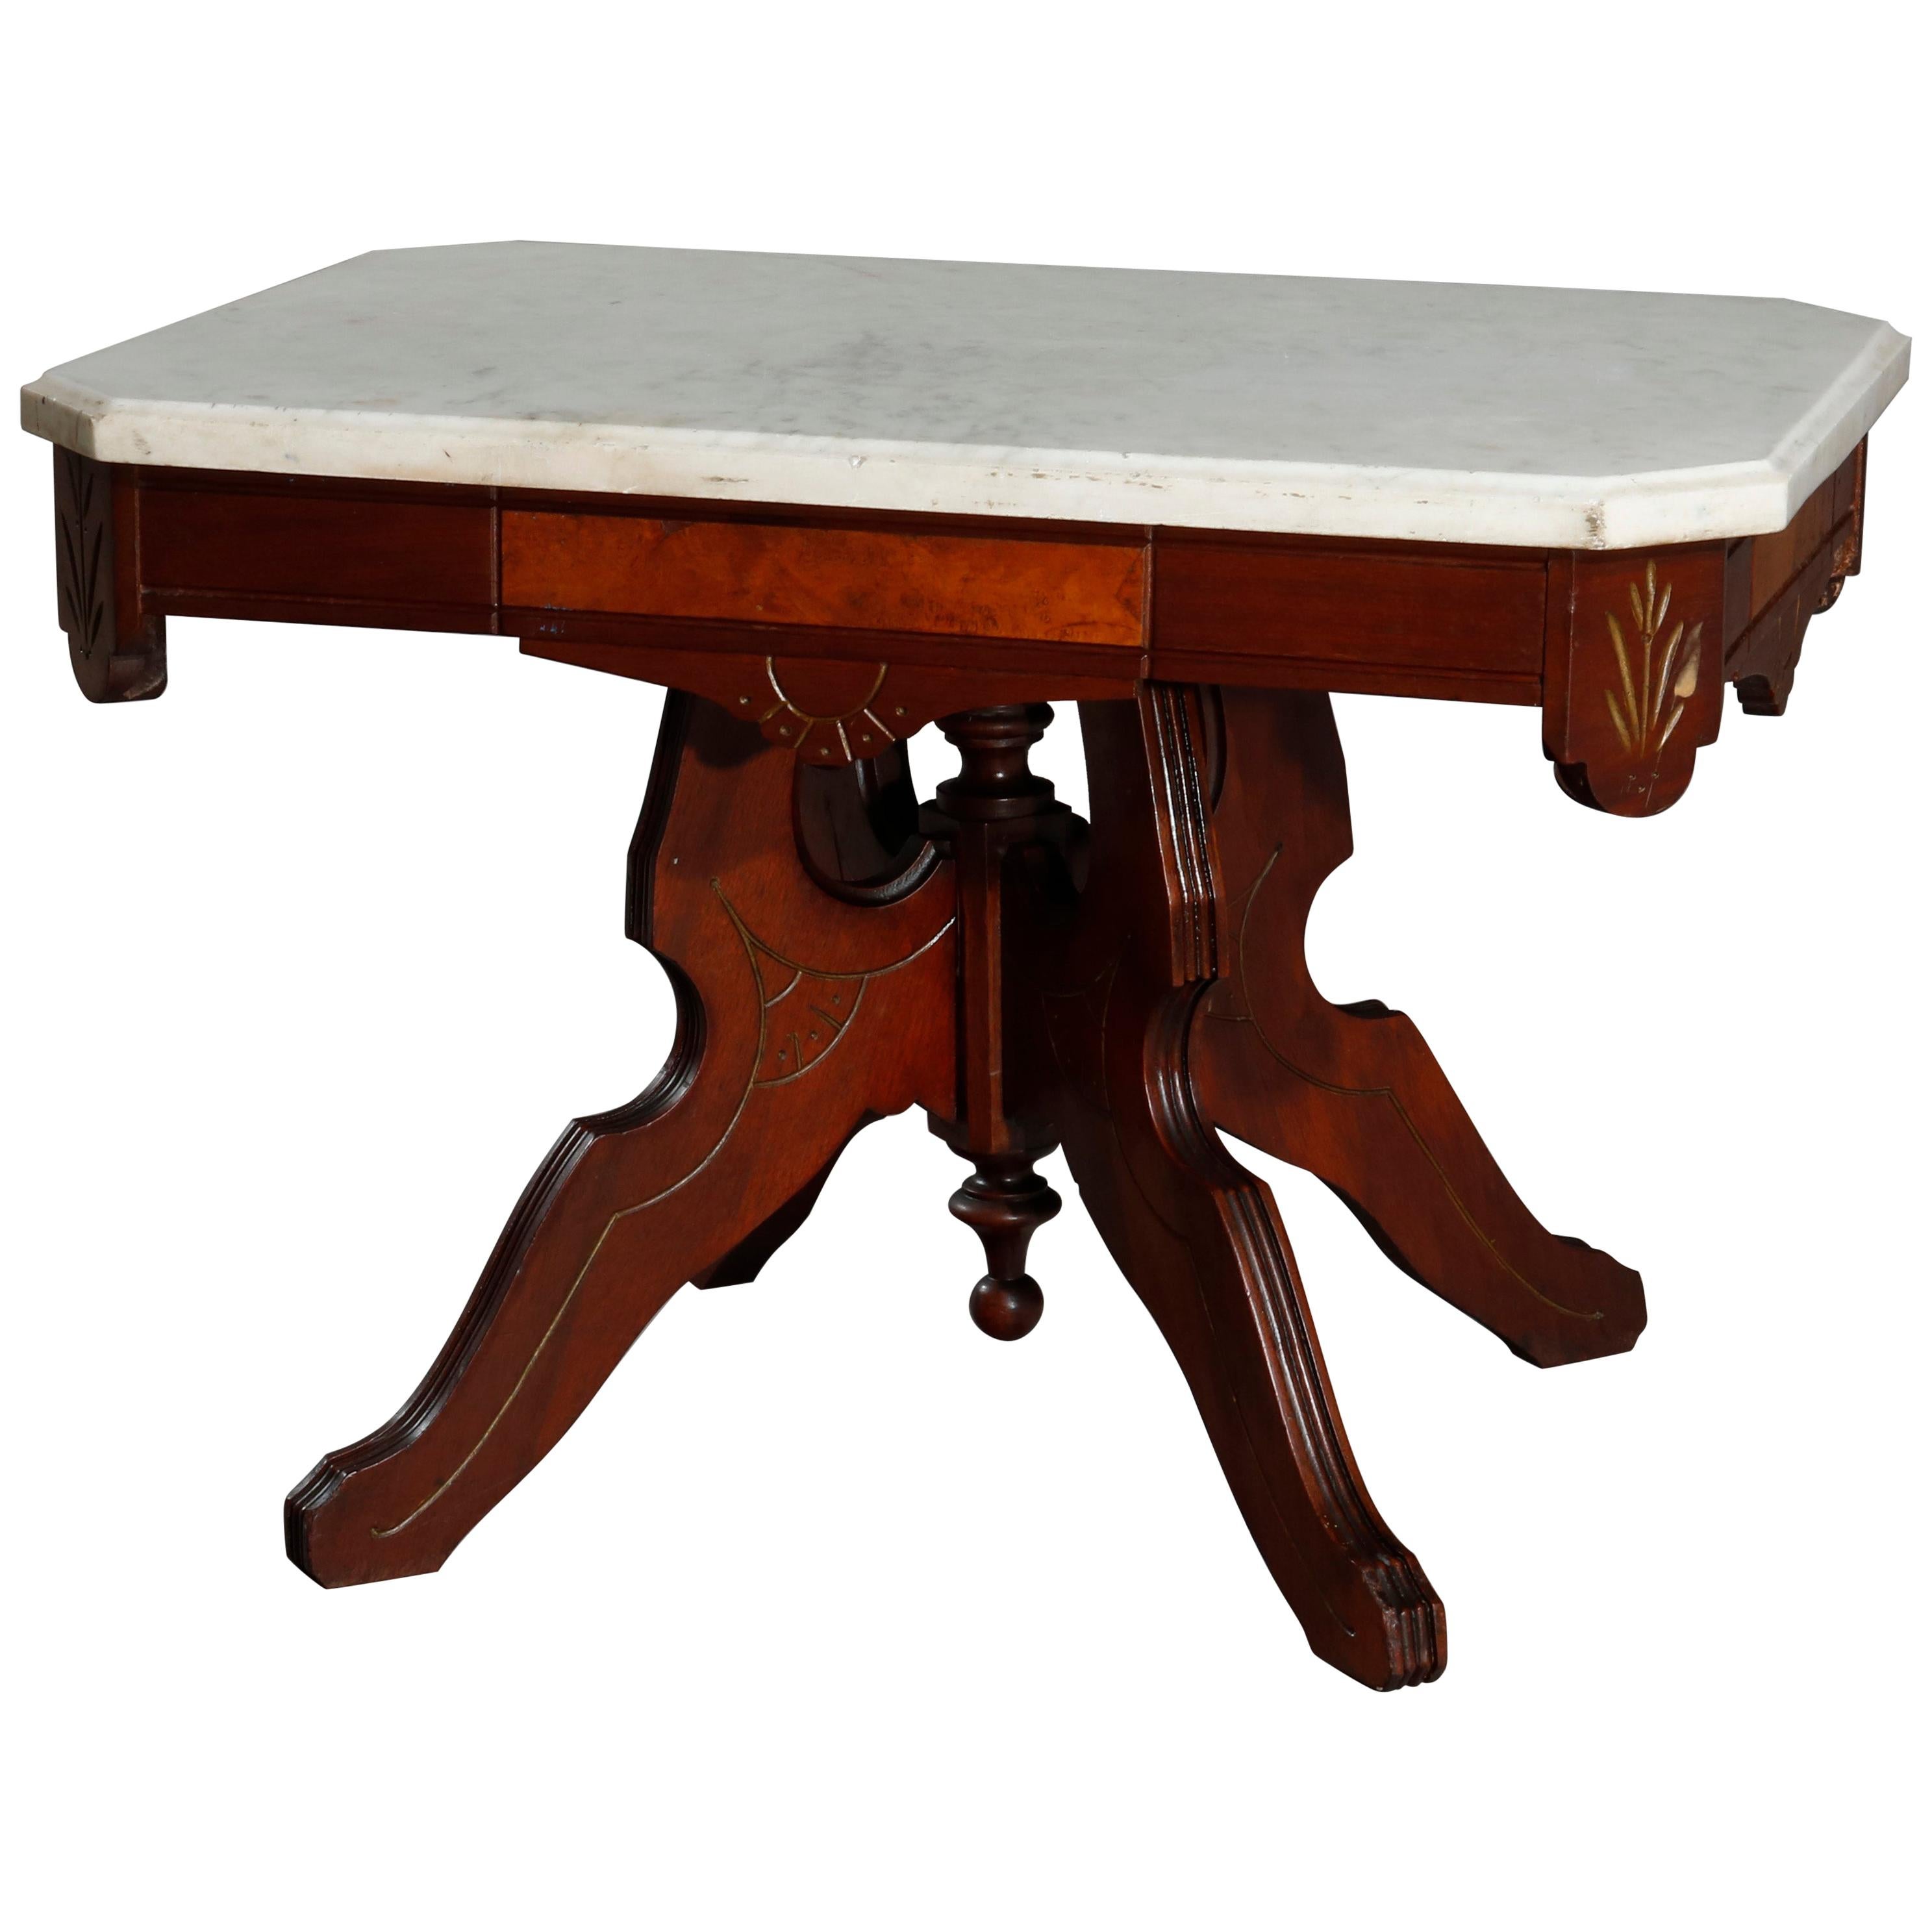 Antique Eastlake Walnut and Burl Marble-Top Low Table, circa 1890